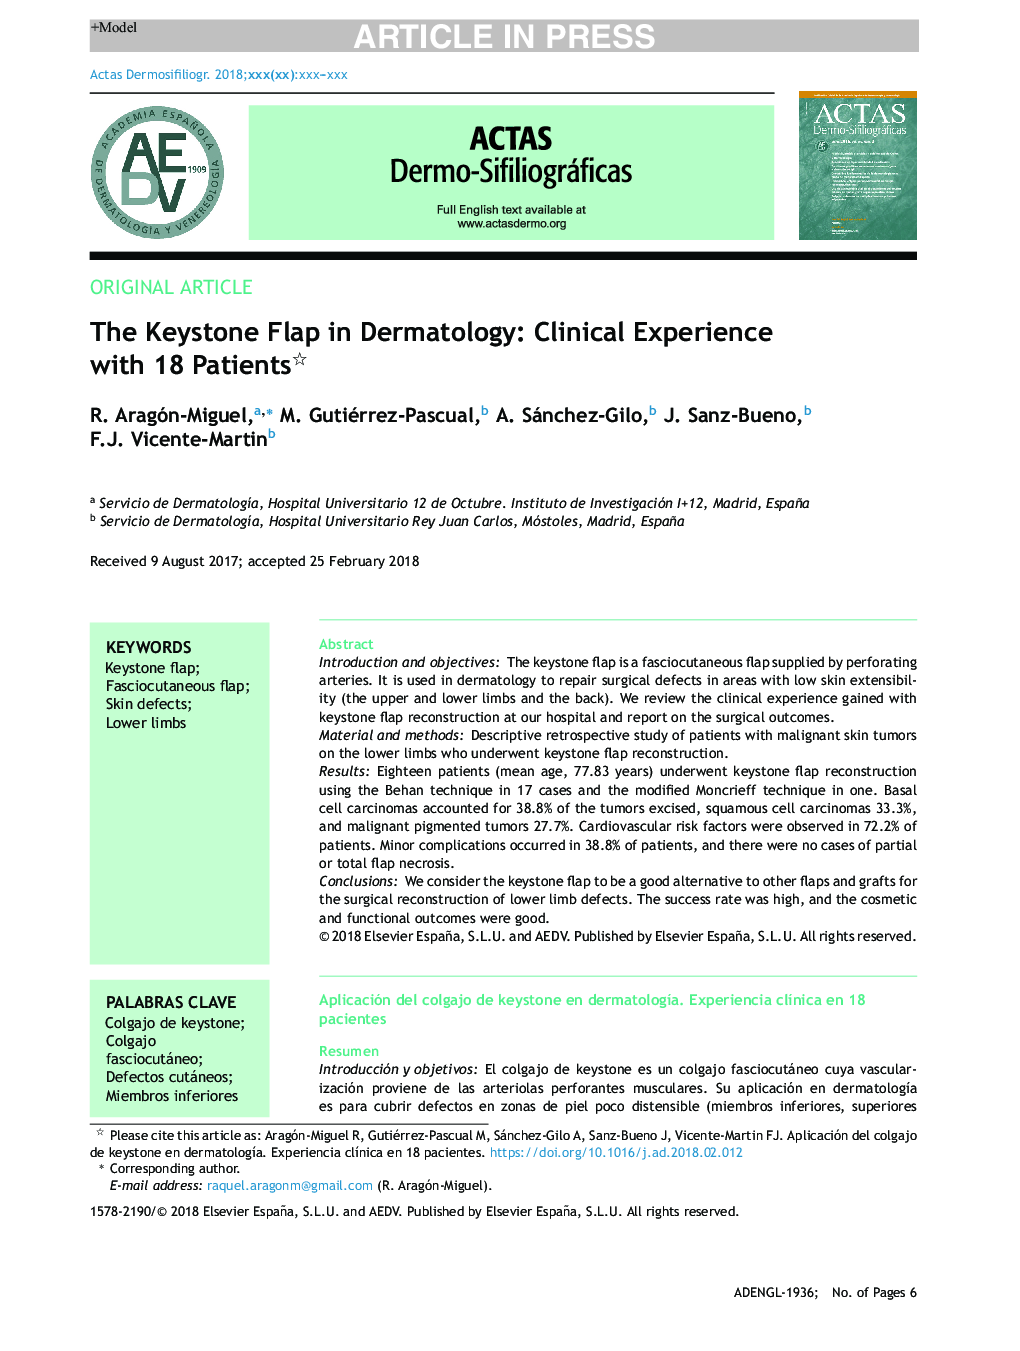 The Keystone Flap in Dermatology: Clinical Experience with 18 Patients